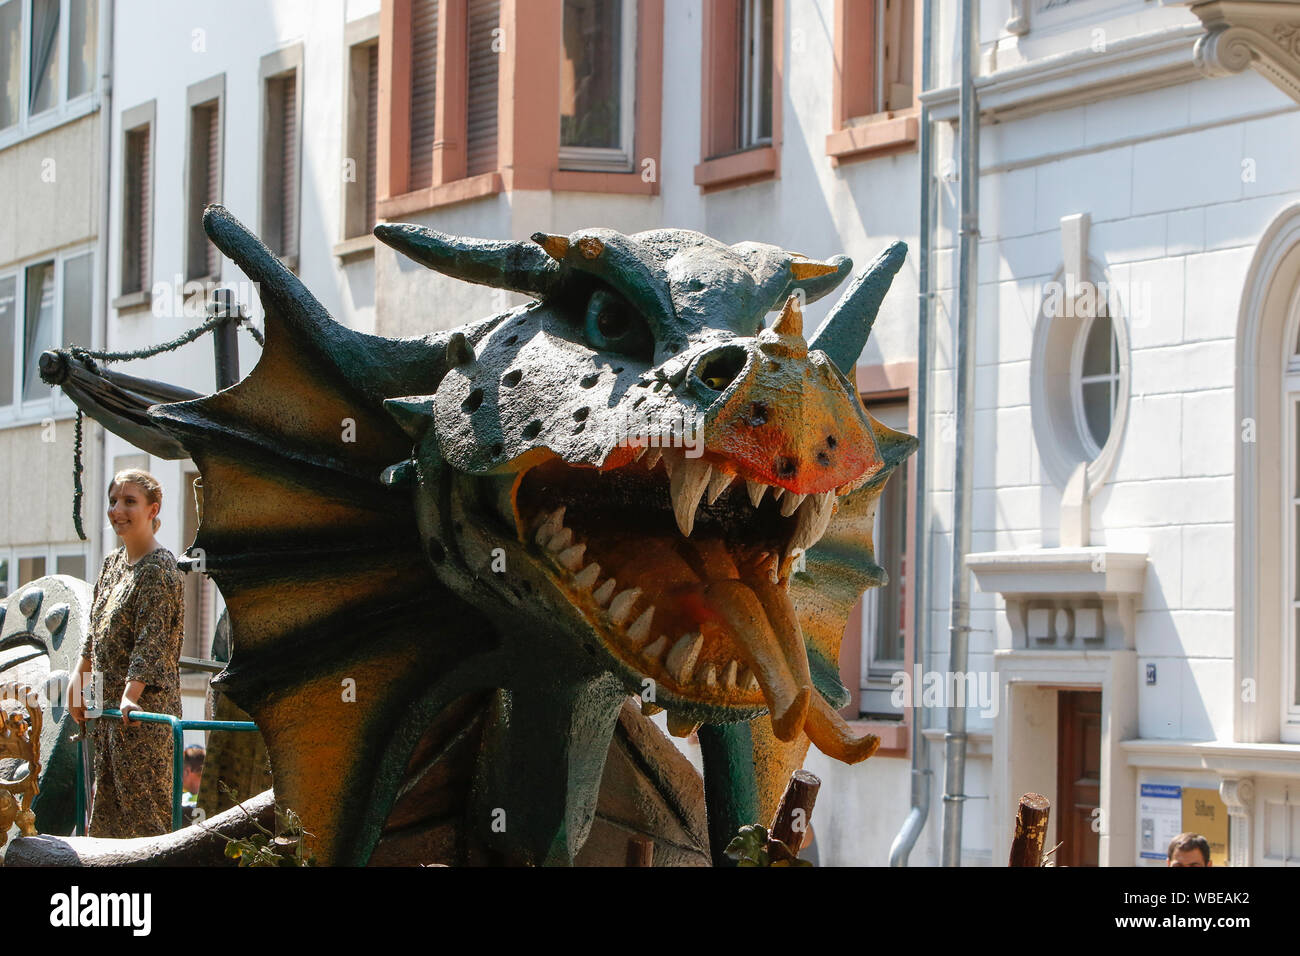 Worms, Germany. 25th August 2019. A dragon's head, the dragon is a symbol for the city of Worms, is pictured on a float. The first highlight of the 2019 Backfischfest was the big parade through the city of Worms with over 70 groups and floats. Community groups, music groups and businesses from Worms and further afield took part. Stock Photo